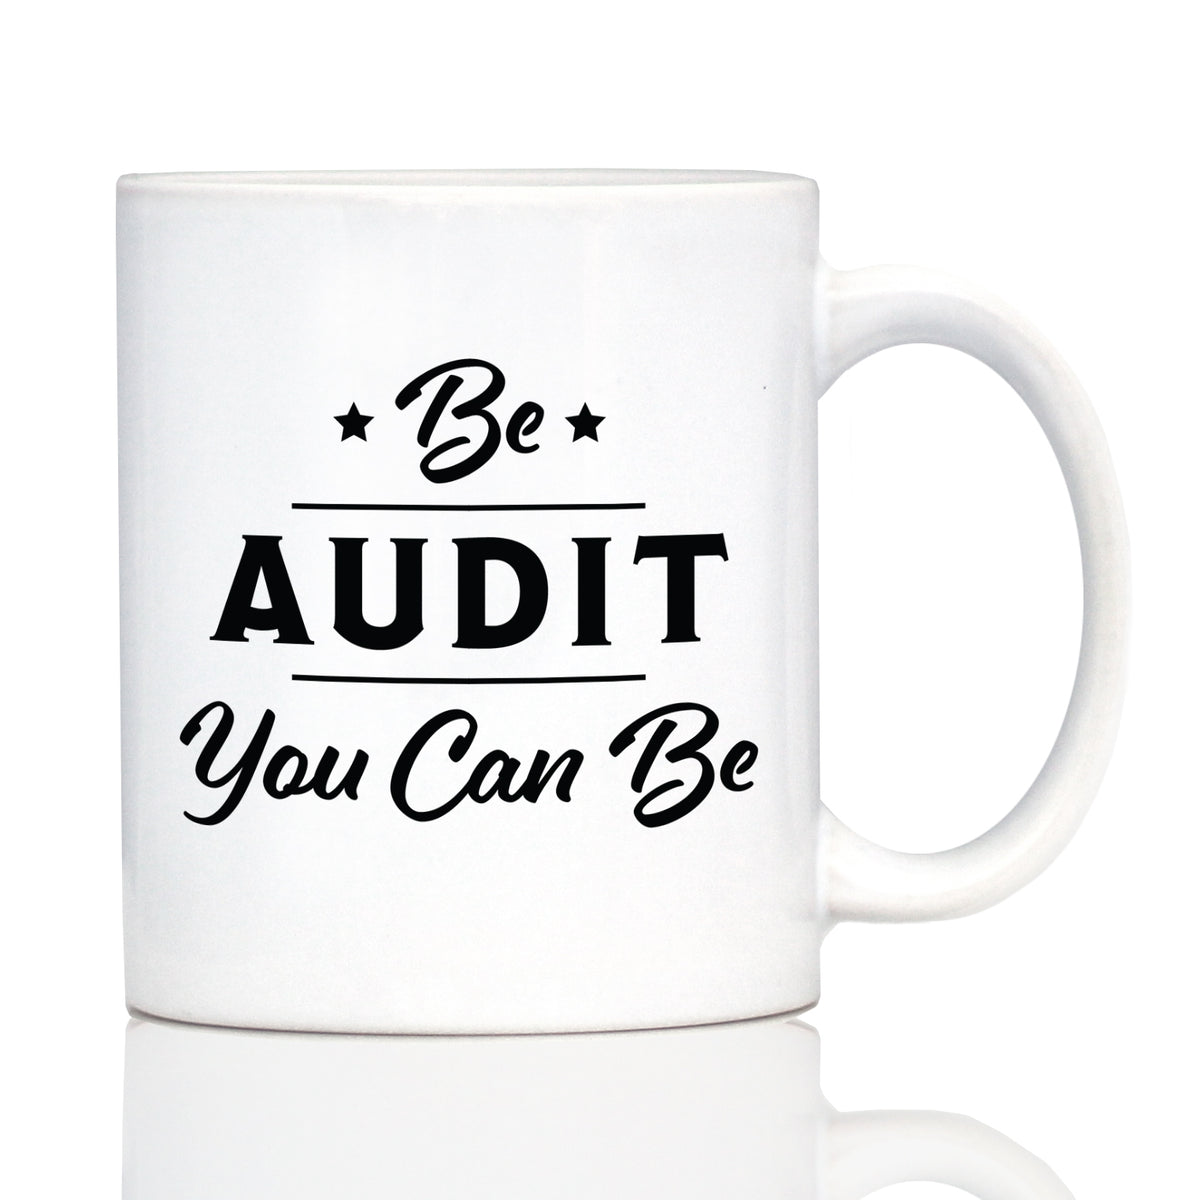 Be Audit You Can Be - Funny Accounting Coffee Mug Gift for Accountants